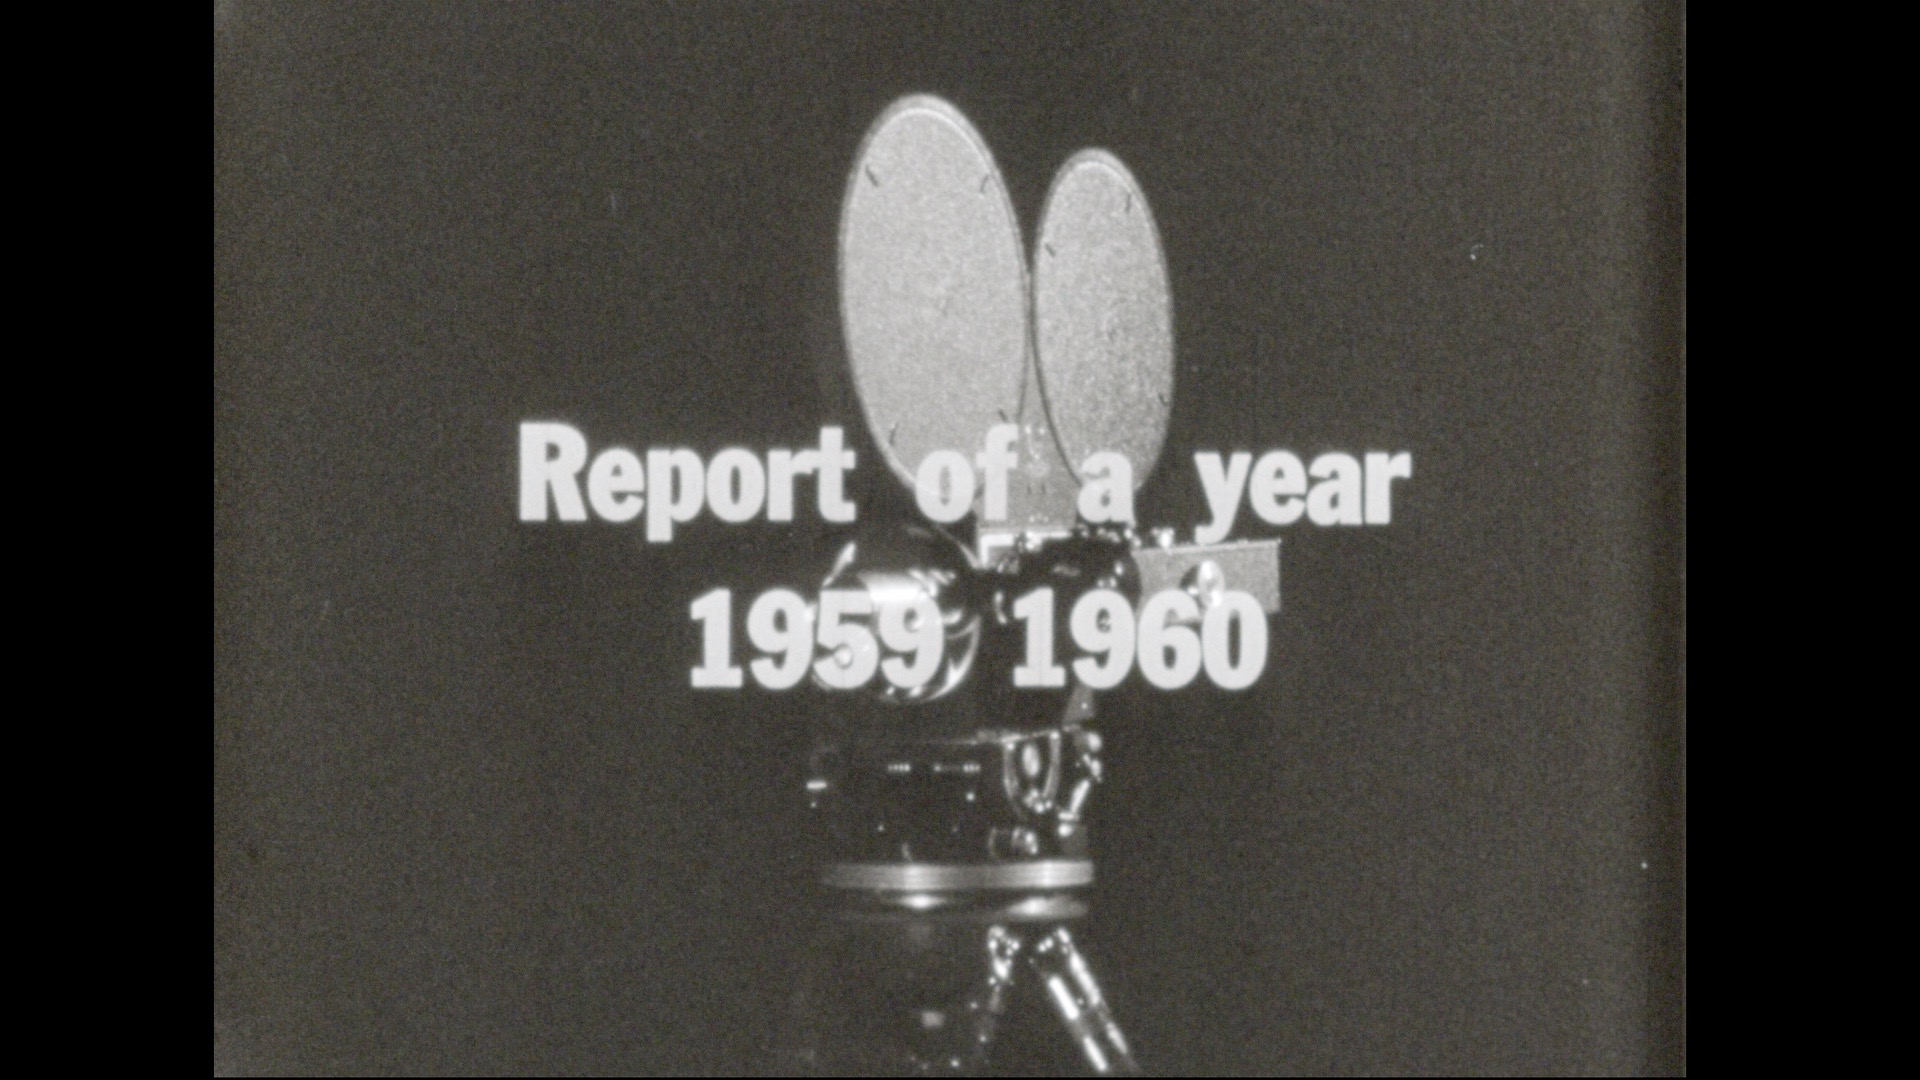 Report of a Year, 1959-1960